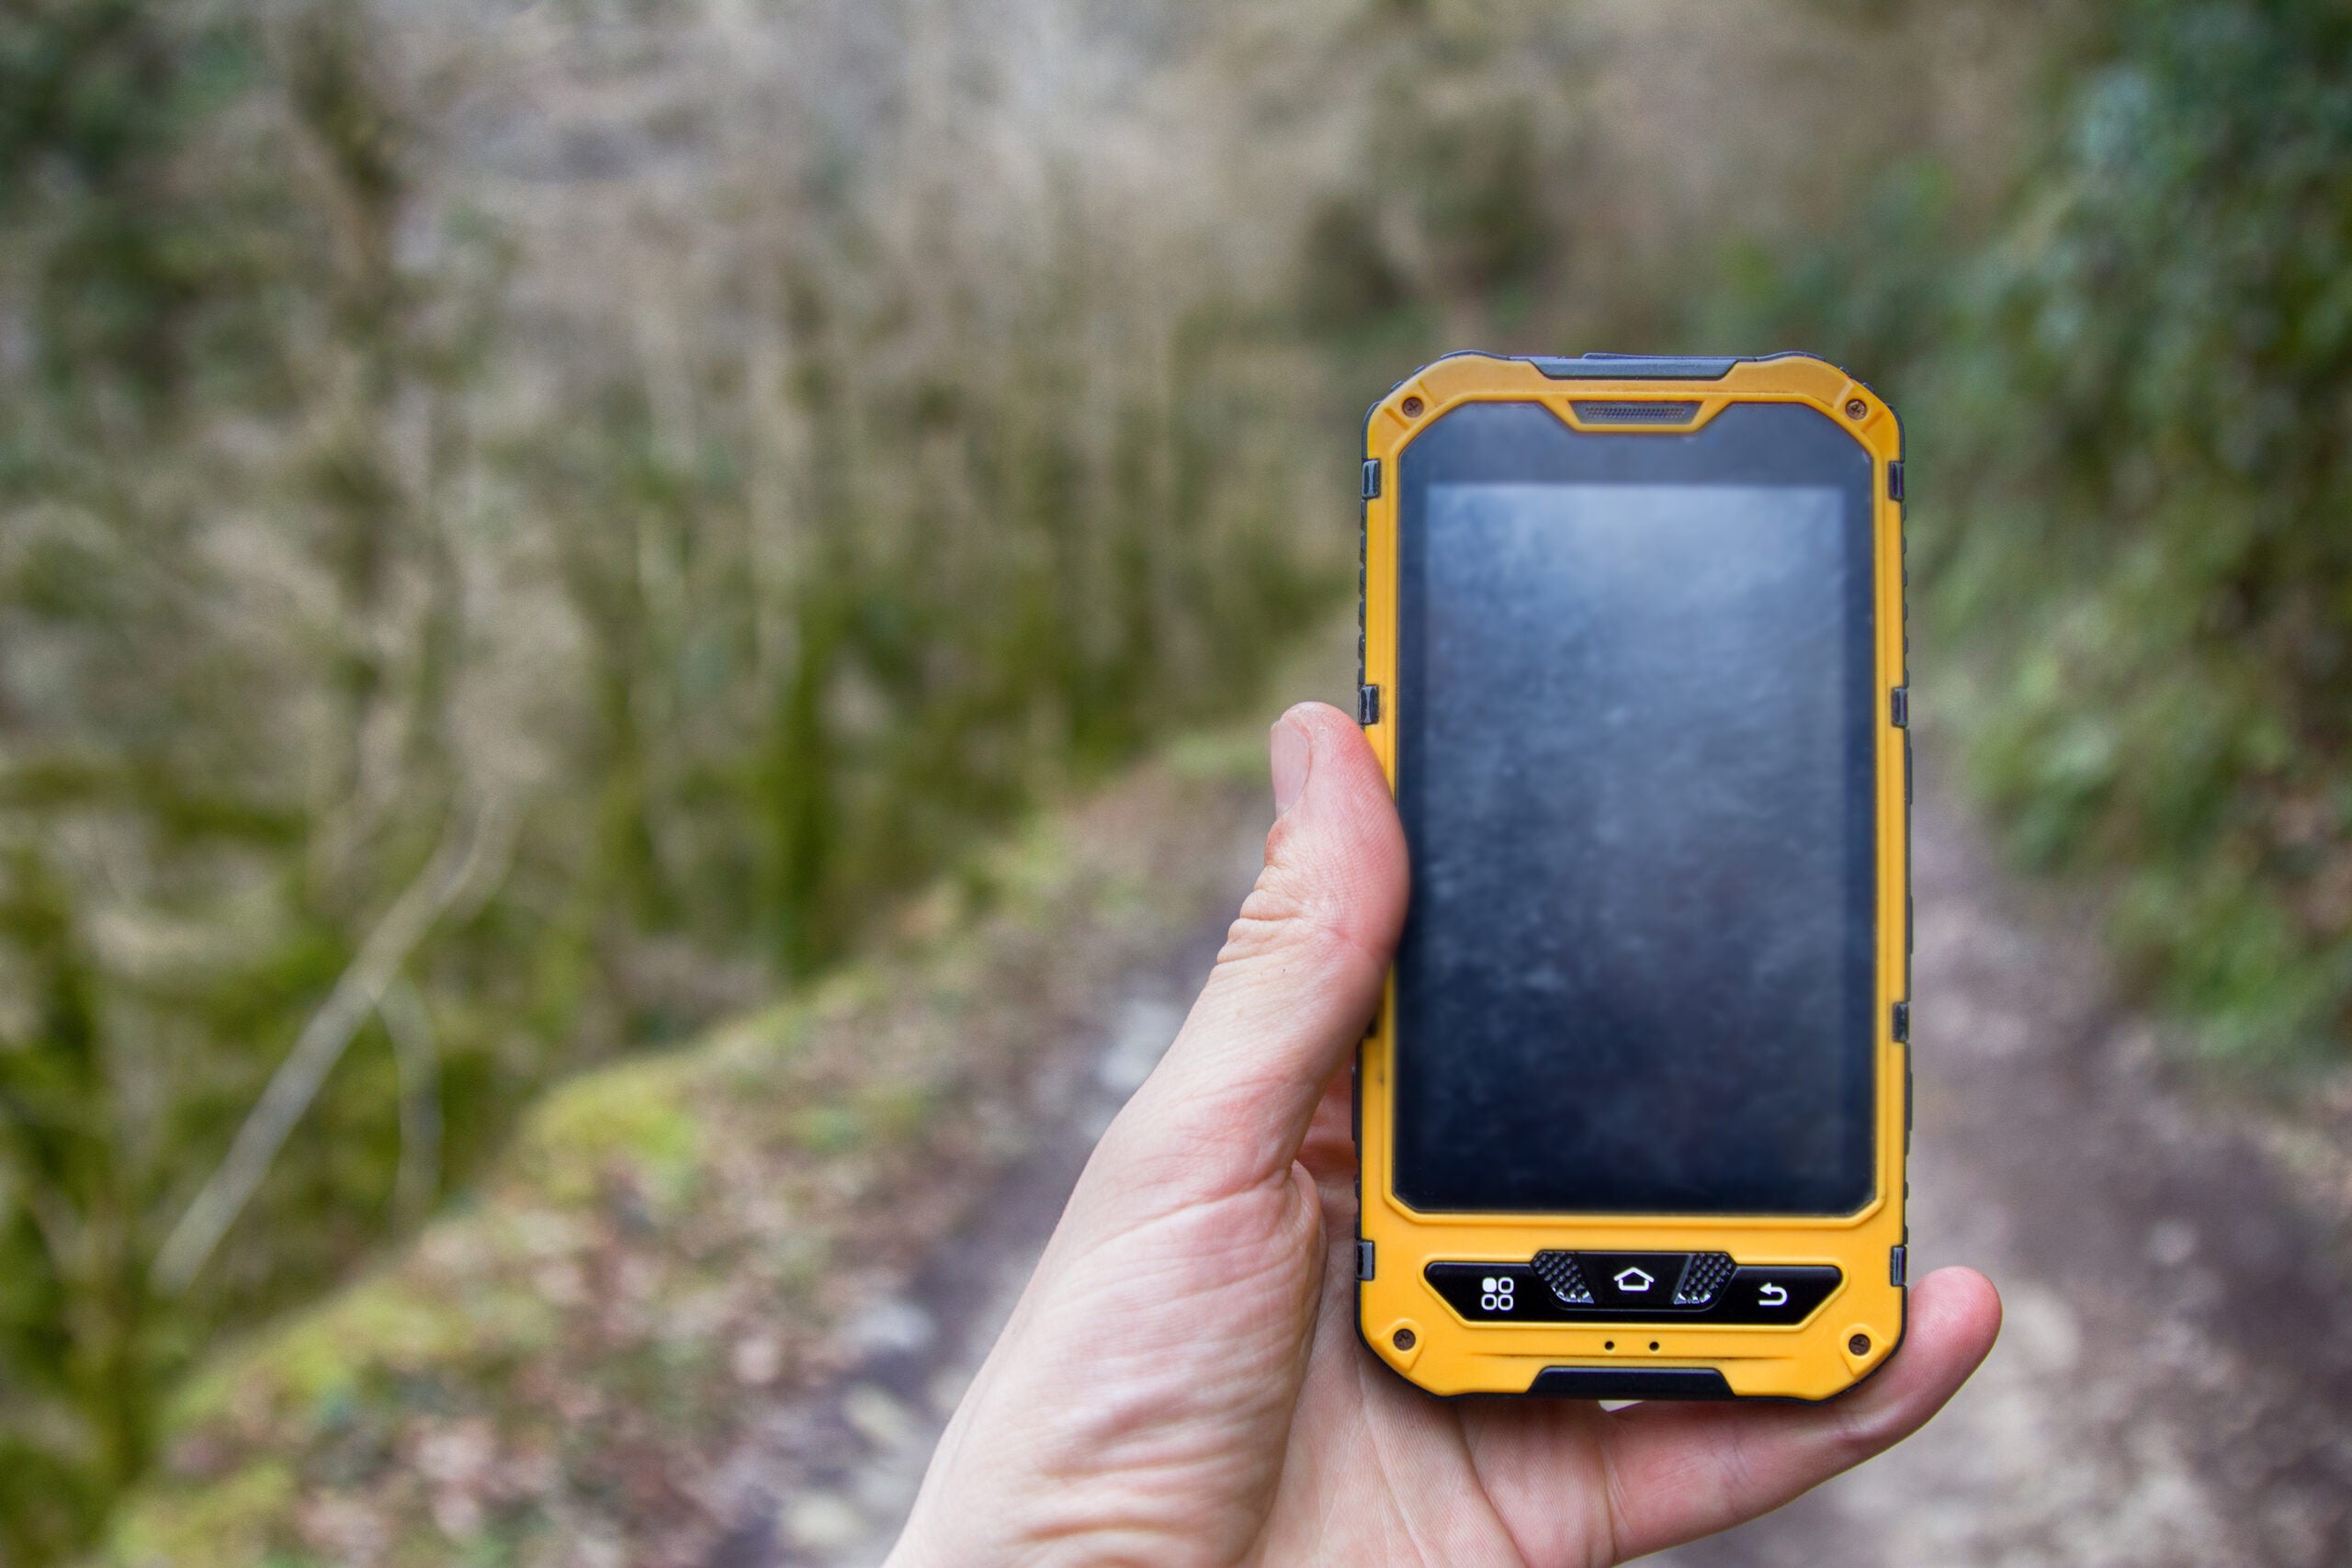 Tips for Buying the Best Satellite Phone